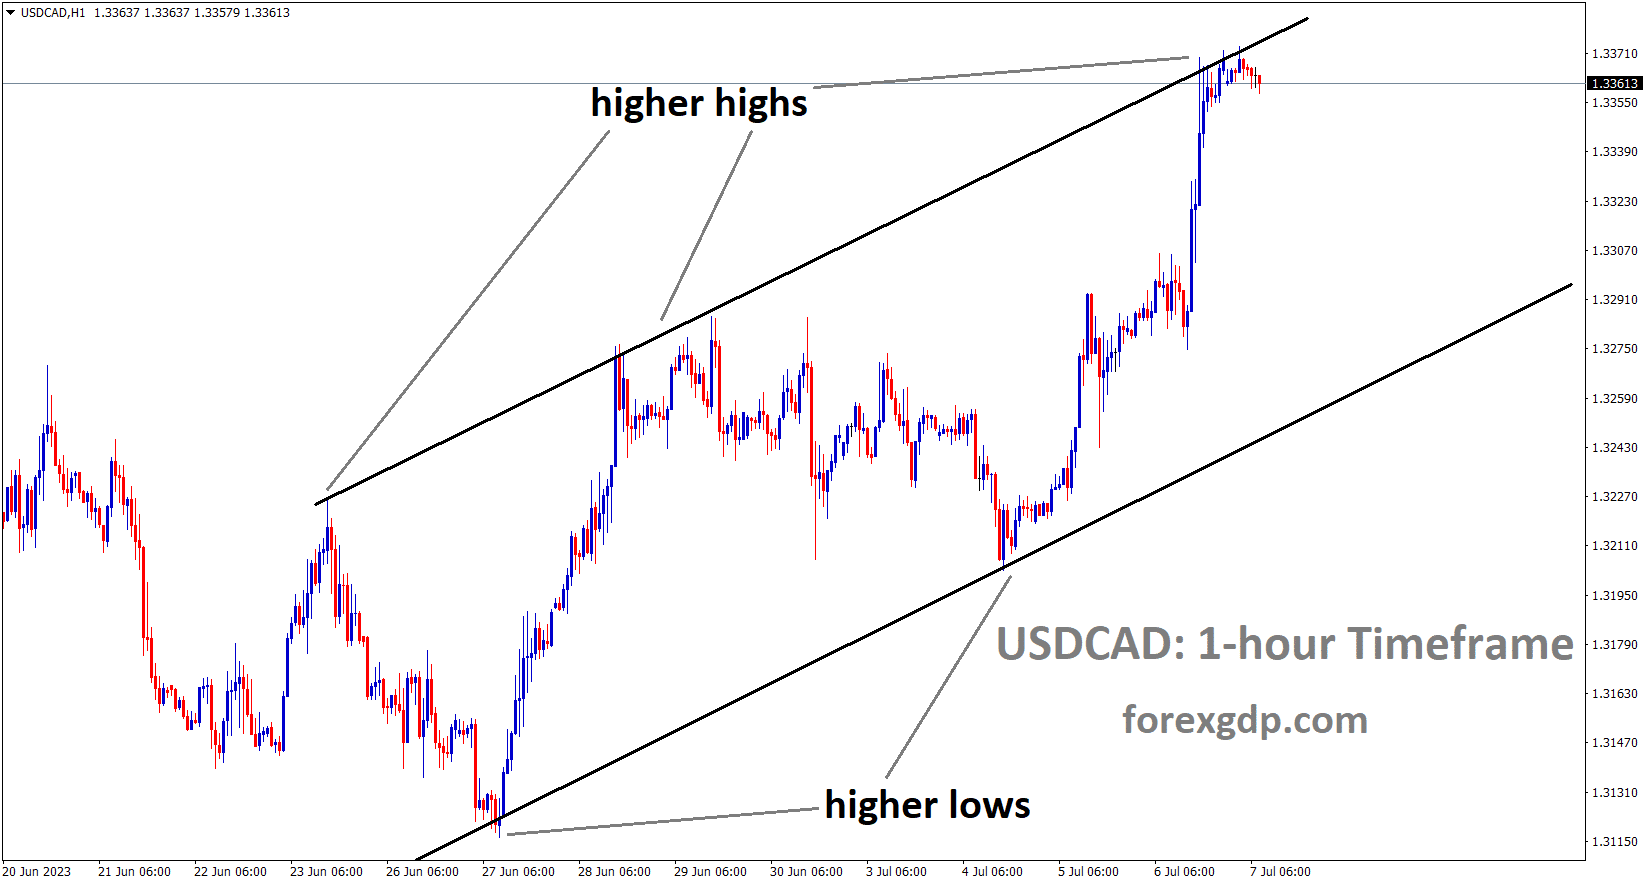 USDCAD H1 TF analysis Market is moving in an Ascending channel and the market has reached the higher high area of the channel